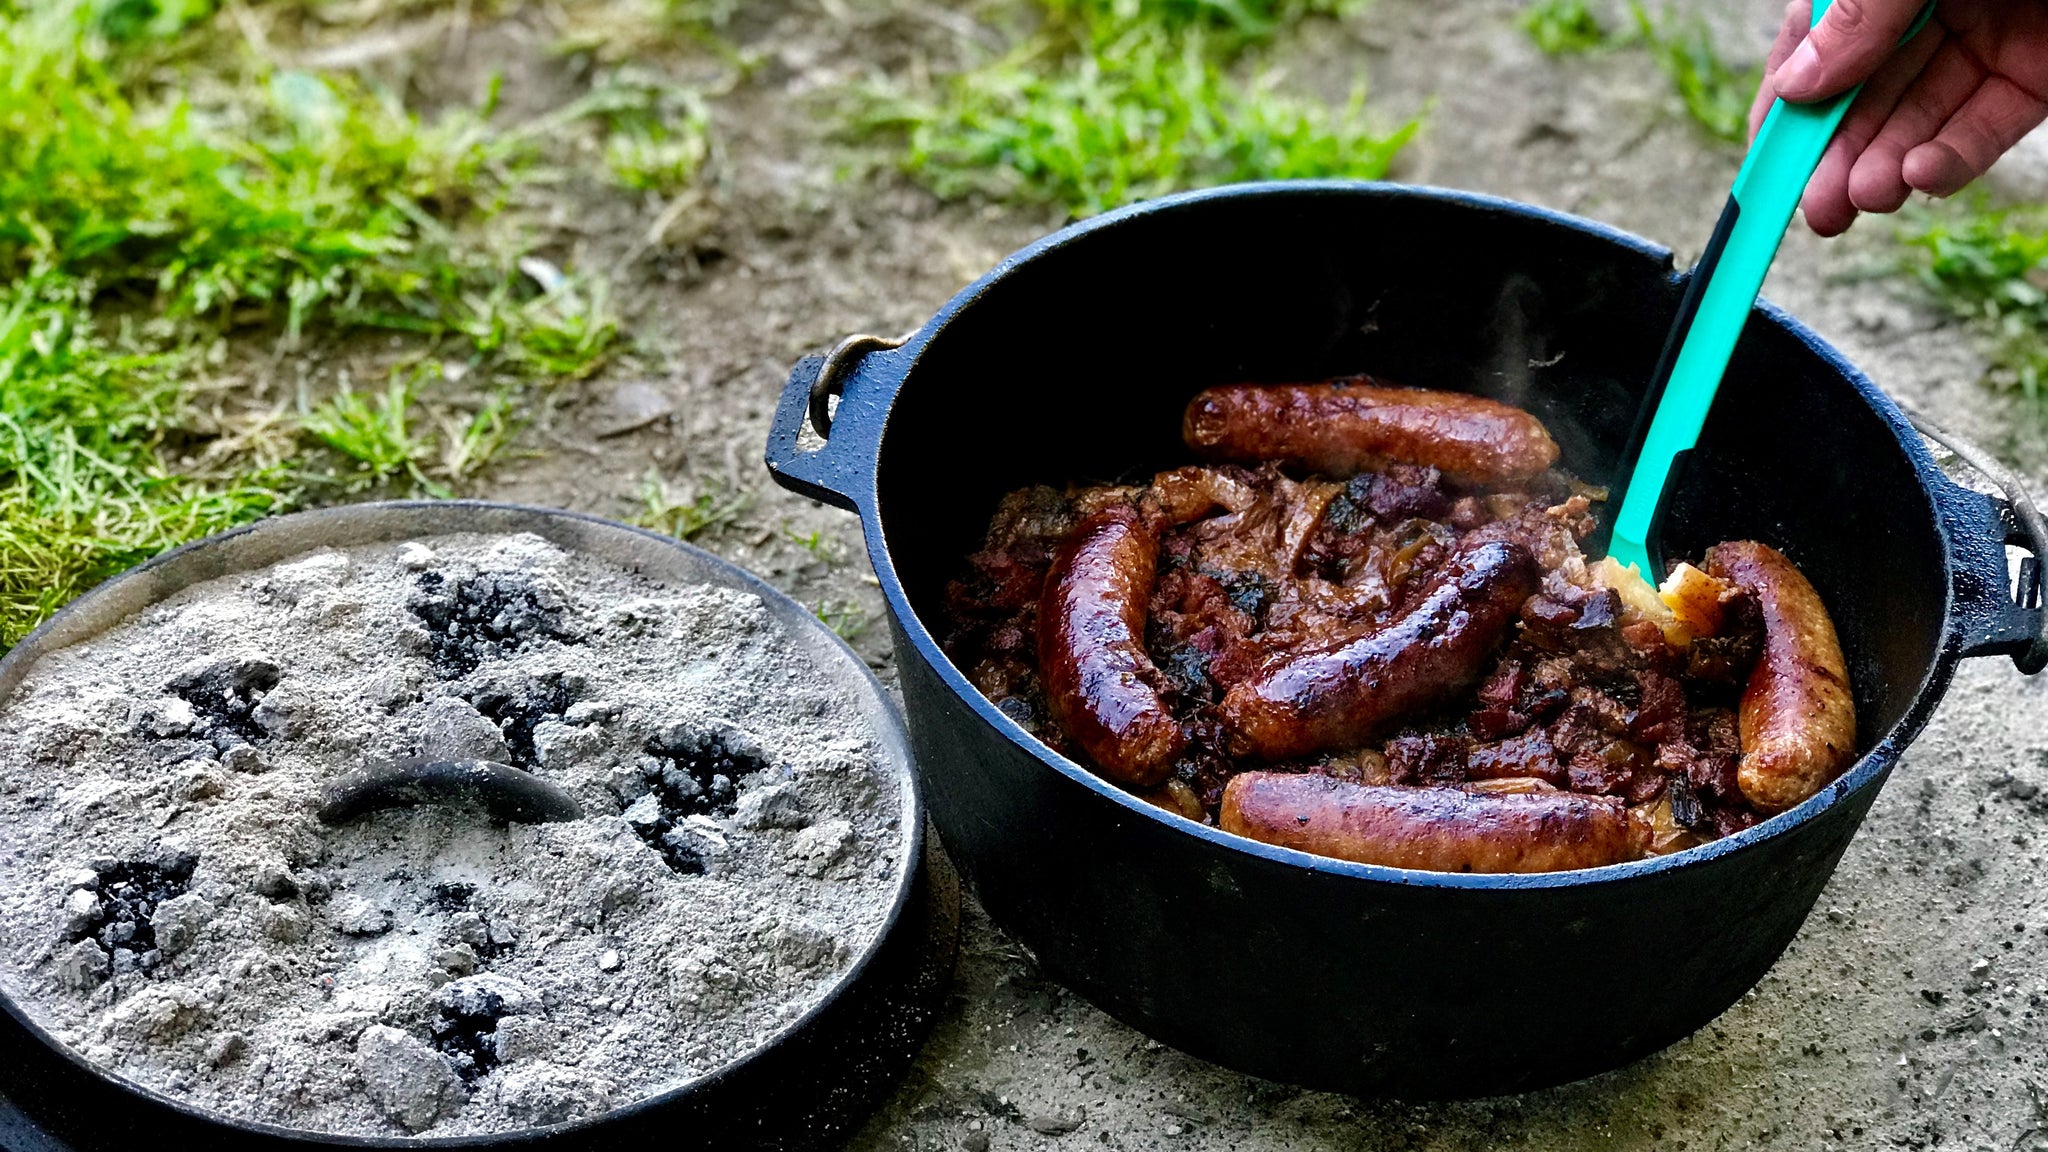 EASY Dutch Oven Camping Recipes (BEST Campfire Cooking Meals)